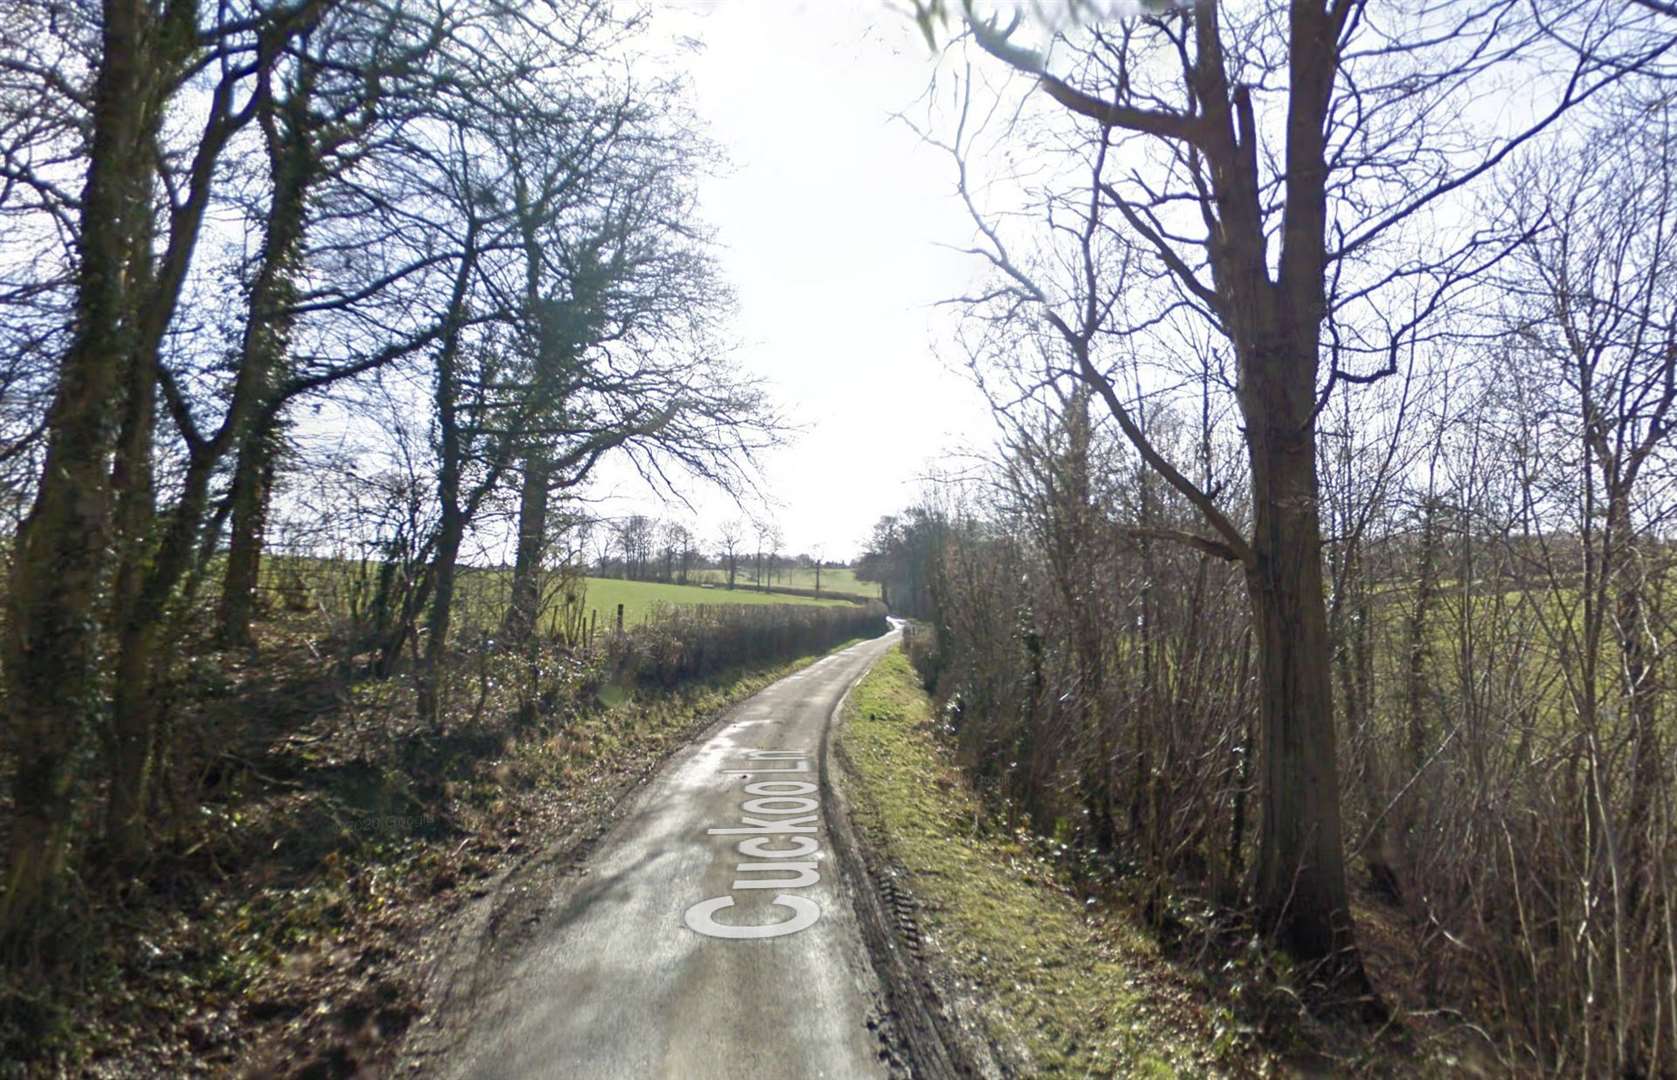 Indecent exposure offences are reported to have happened in Cuckoo Lane in Brenchley, Tonbridge. Picture: Google Maps